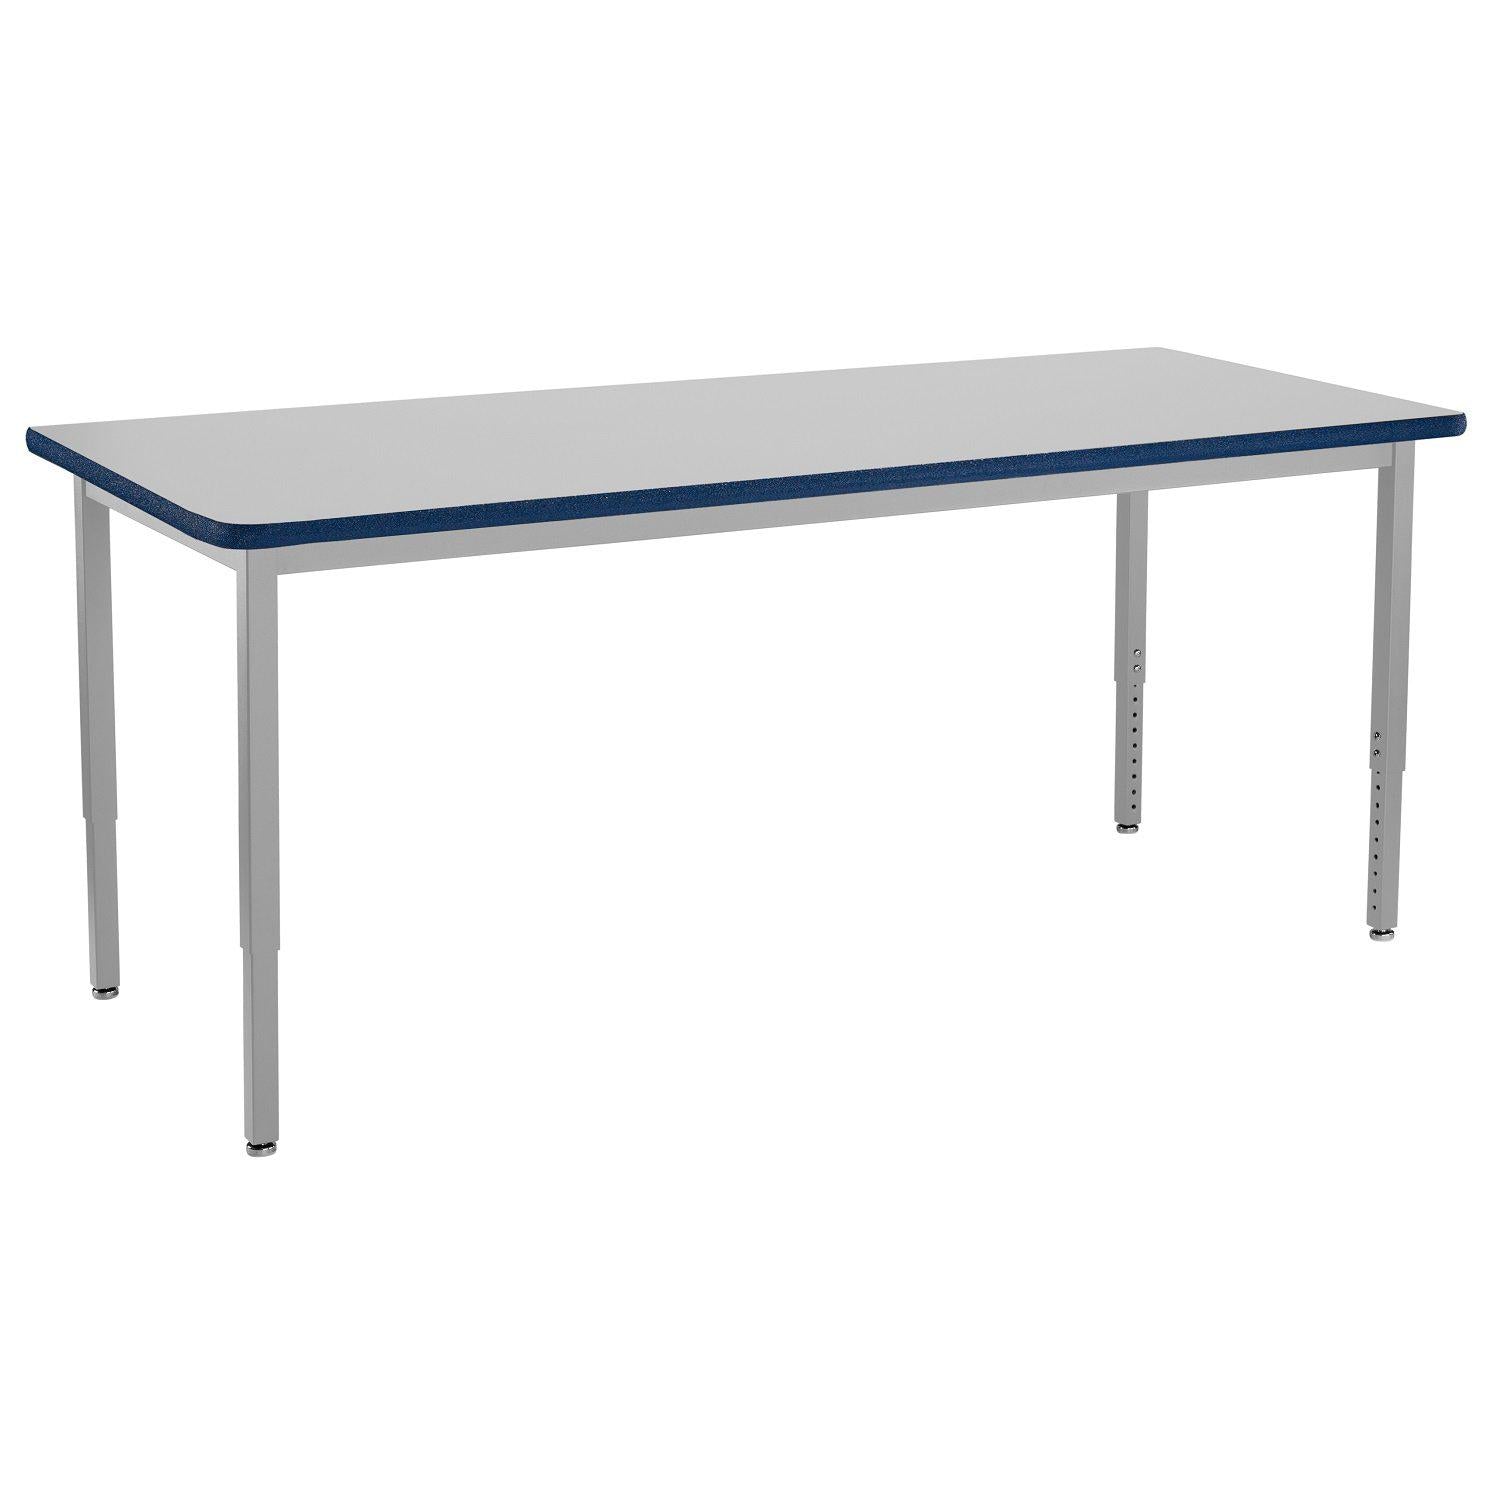 Heavy-Duty Height-Adjustable Utility Table, Soft Grey Frame, 30" x 72", Supreme High-Pressure Laminate Top with Black ProtectEdge